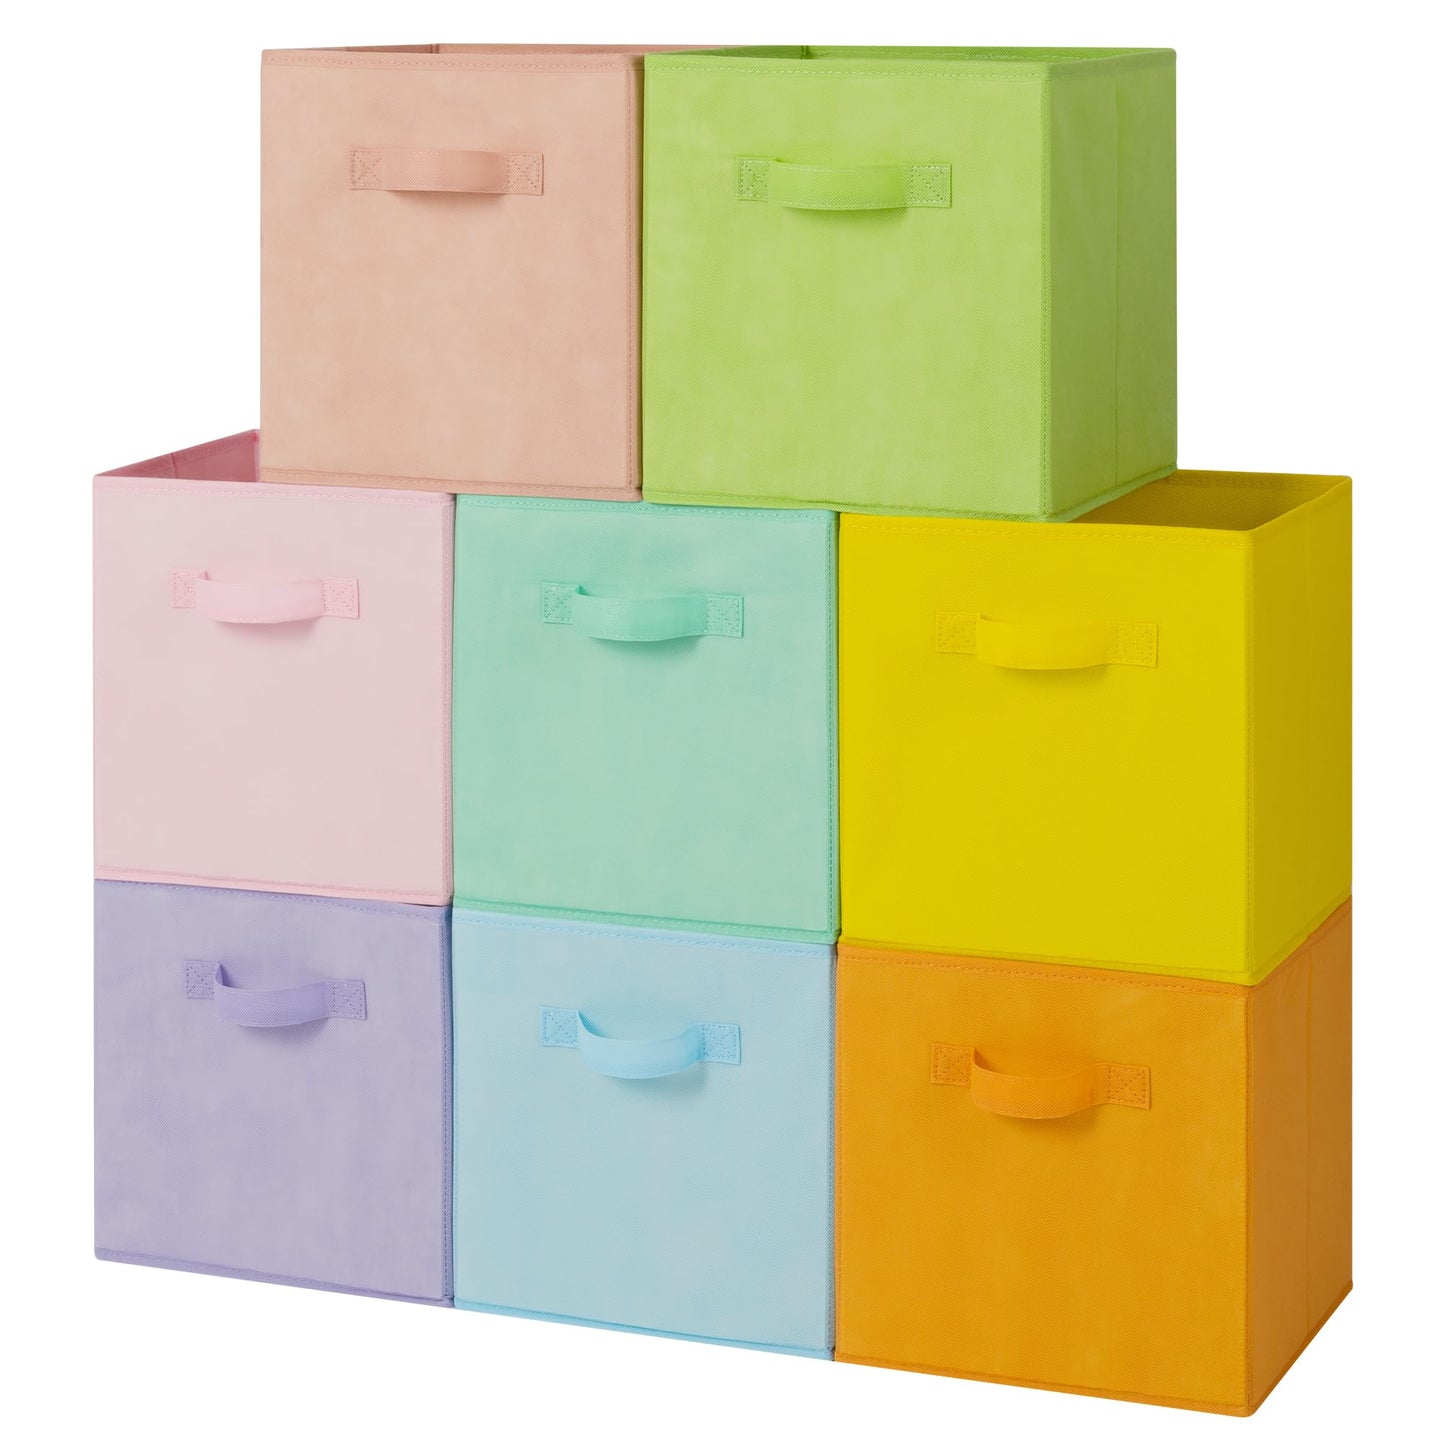 Fabric Storage Bins, 8 Pack Storage Cube Bins, 11 Inch Colored Storage Cube Organizer, Storage Organizer, Collapsible Storage Baskets for Clothes, Closet, Shelves, Colour